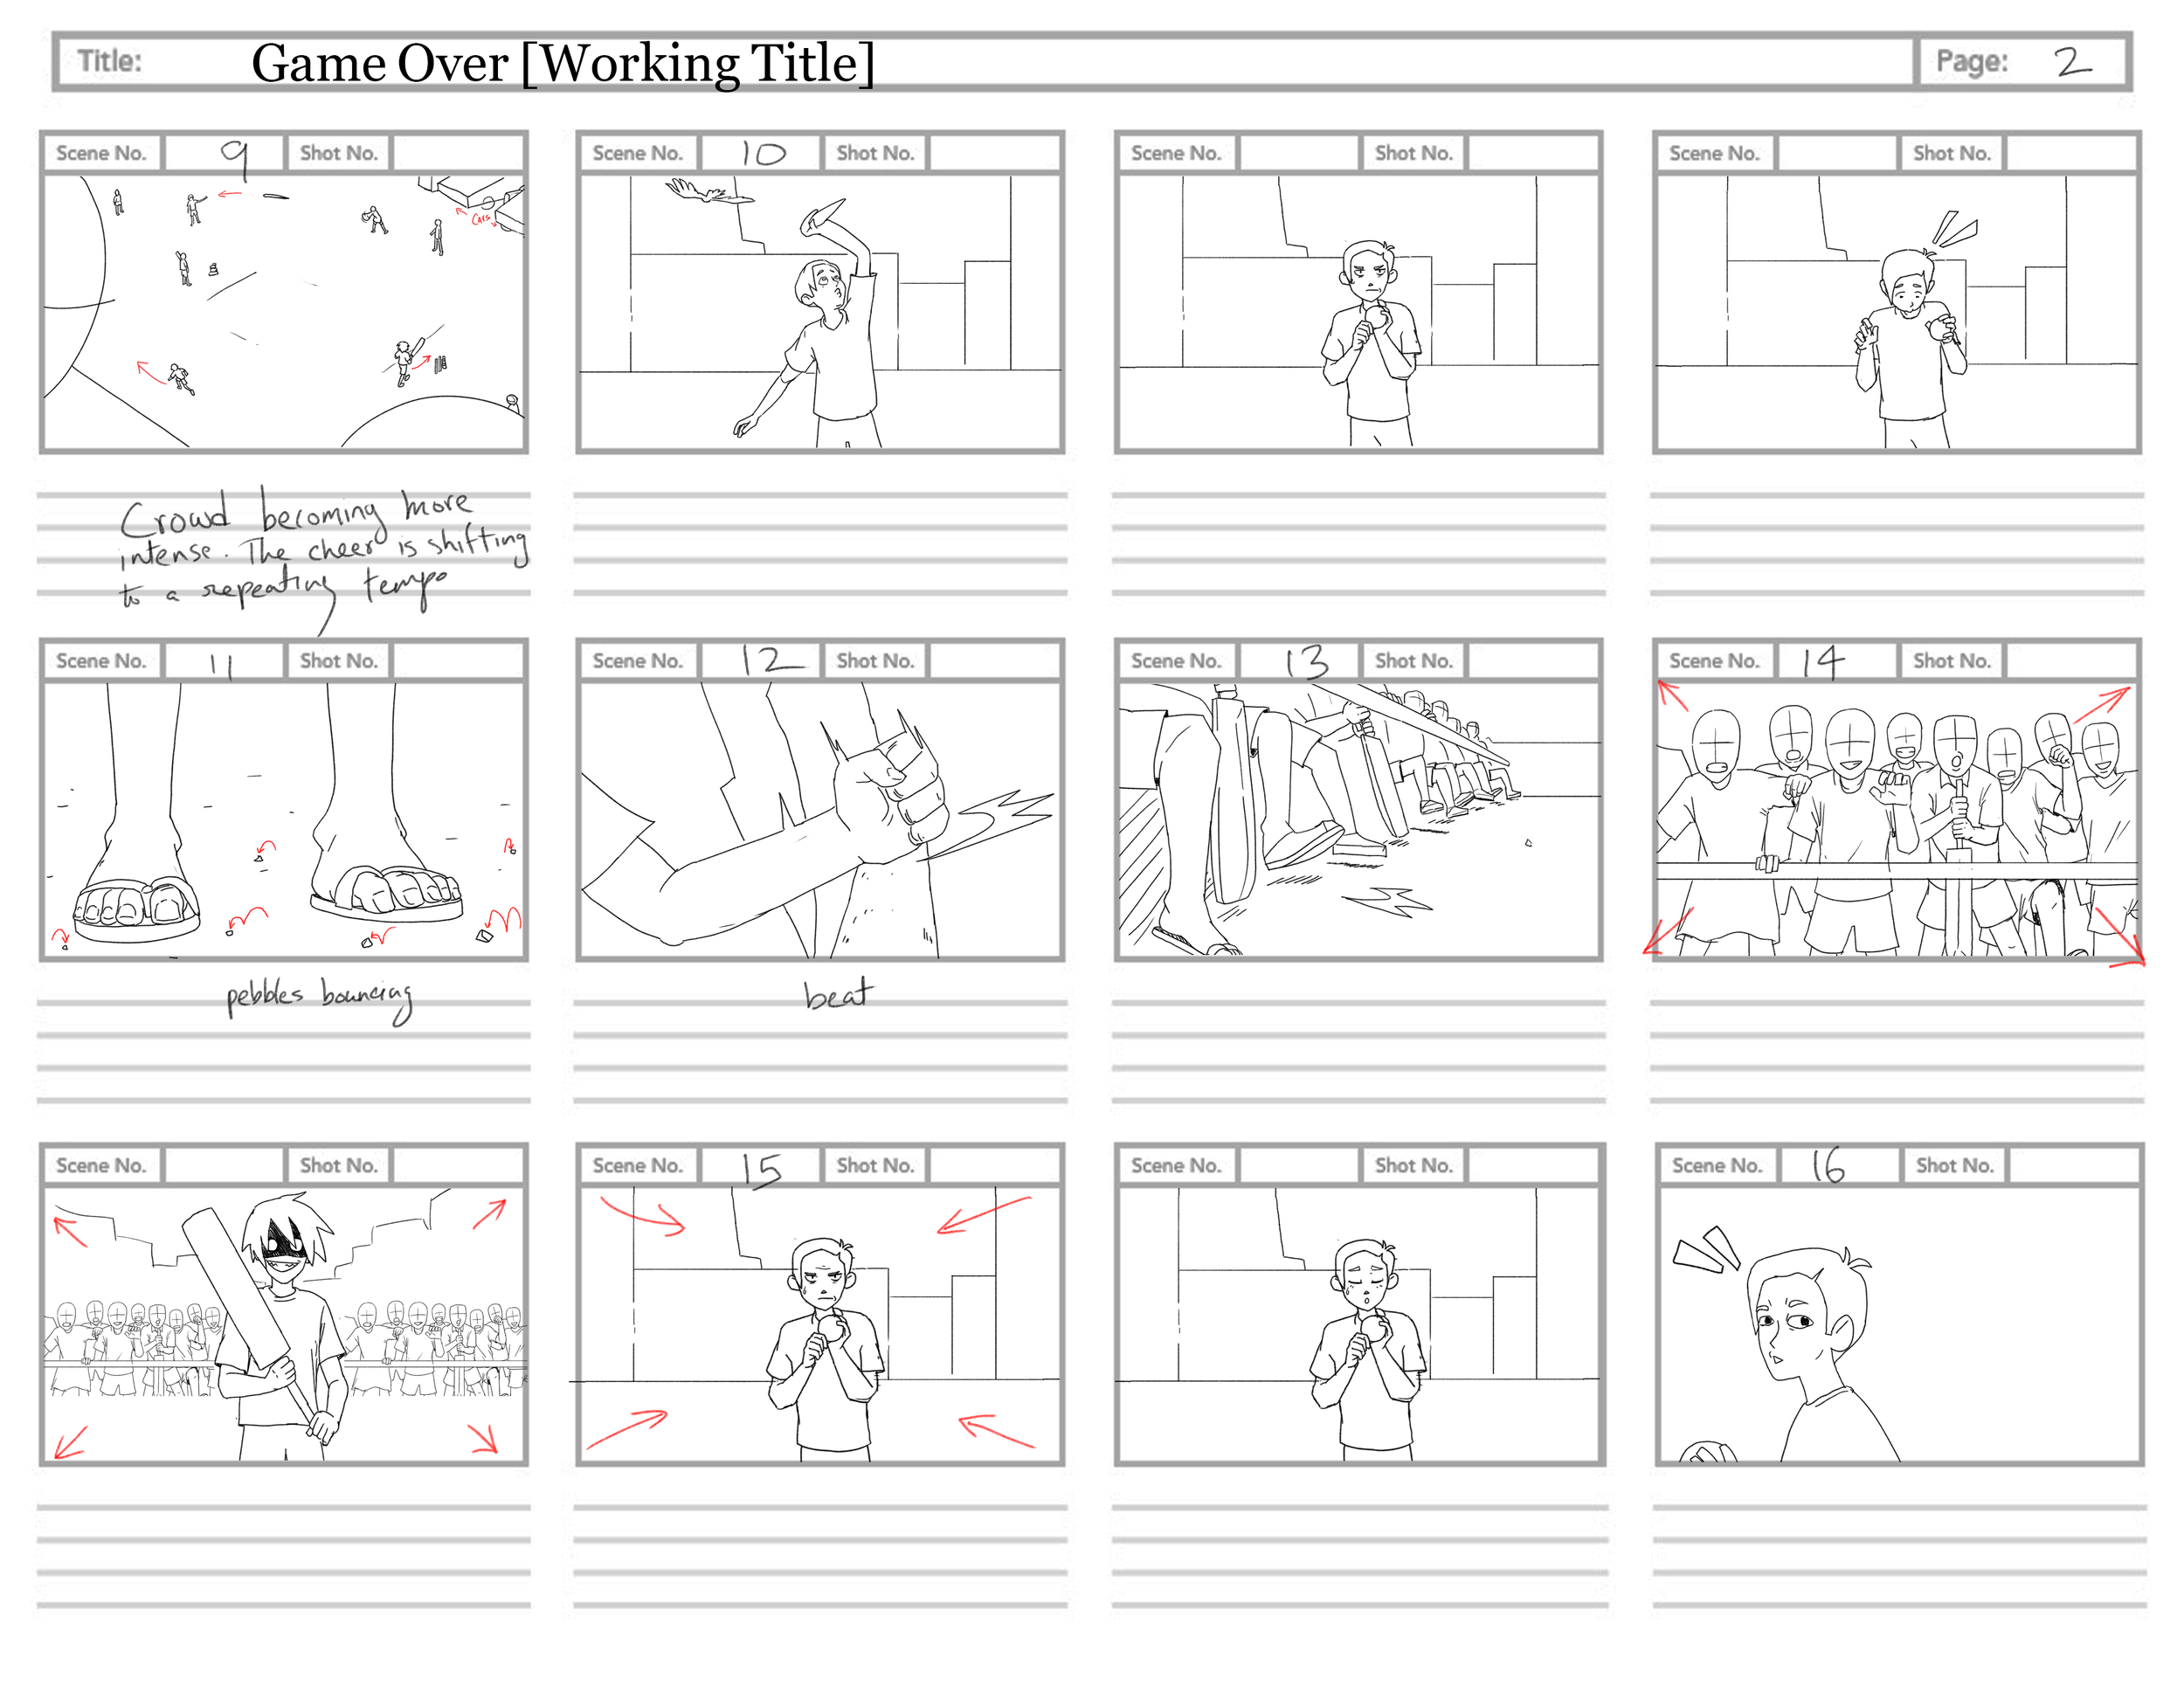 Storyboard_page 2.png